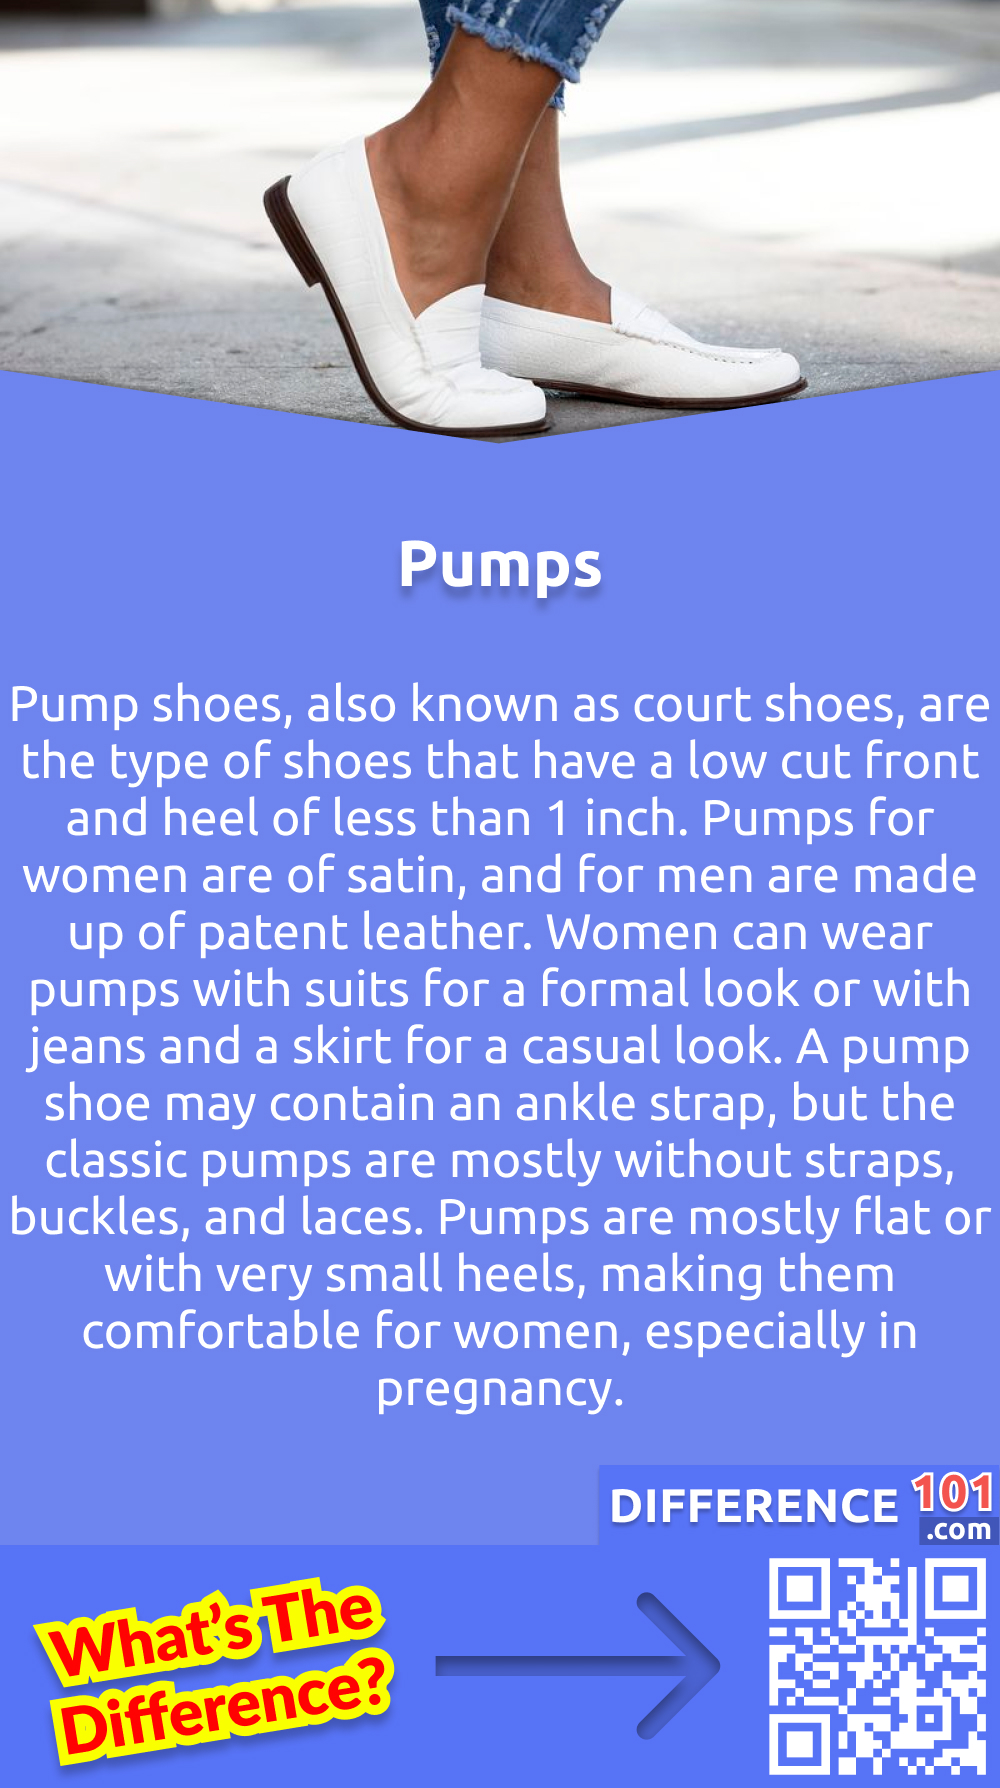 What are pumps? Pump shoes, also known as court shoes, are the type of shoes that have a low cut front and heel of less than 1 inch. Pumps for women are of satin, and for men are made up of patent leather. Women can wear pumps with suits for a formal look or with jeans and a skirt for a casual look. A pump shoe may contain an ankle strap, but the classic pumps are mostly without straps, buckles, and laces. Pumps are mostly flat or with very small heels, making them comfortable for women, especially in pregnancy.